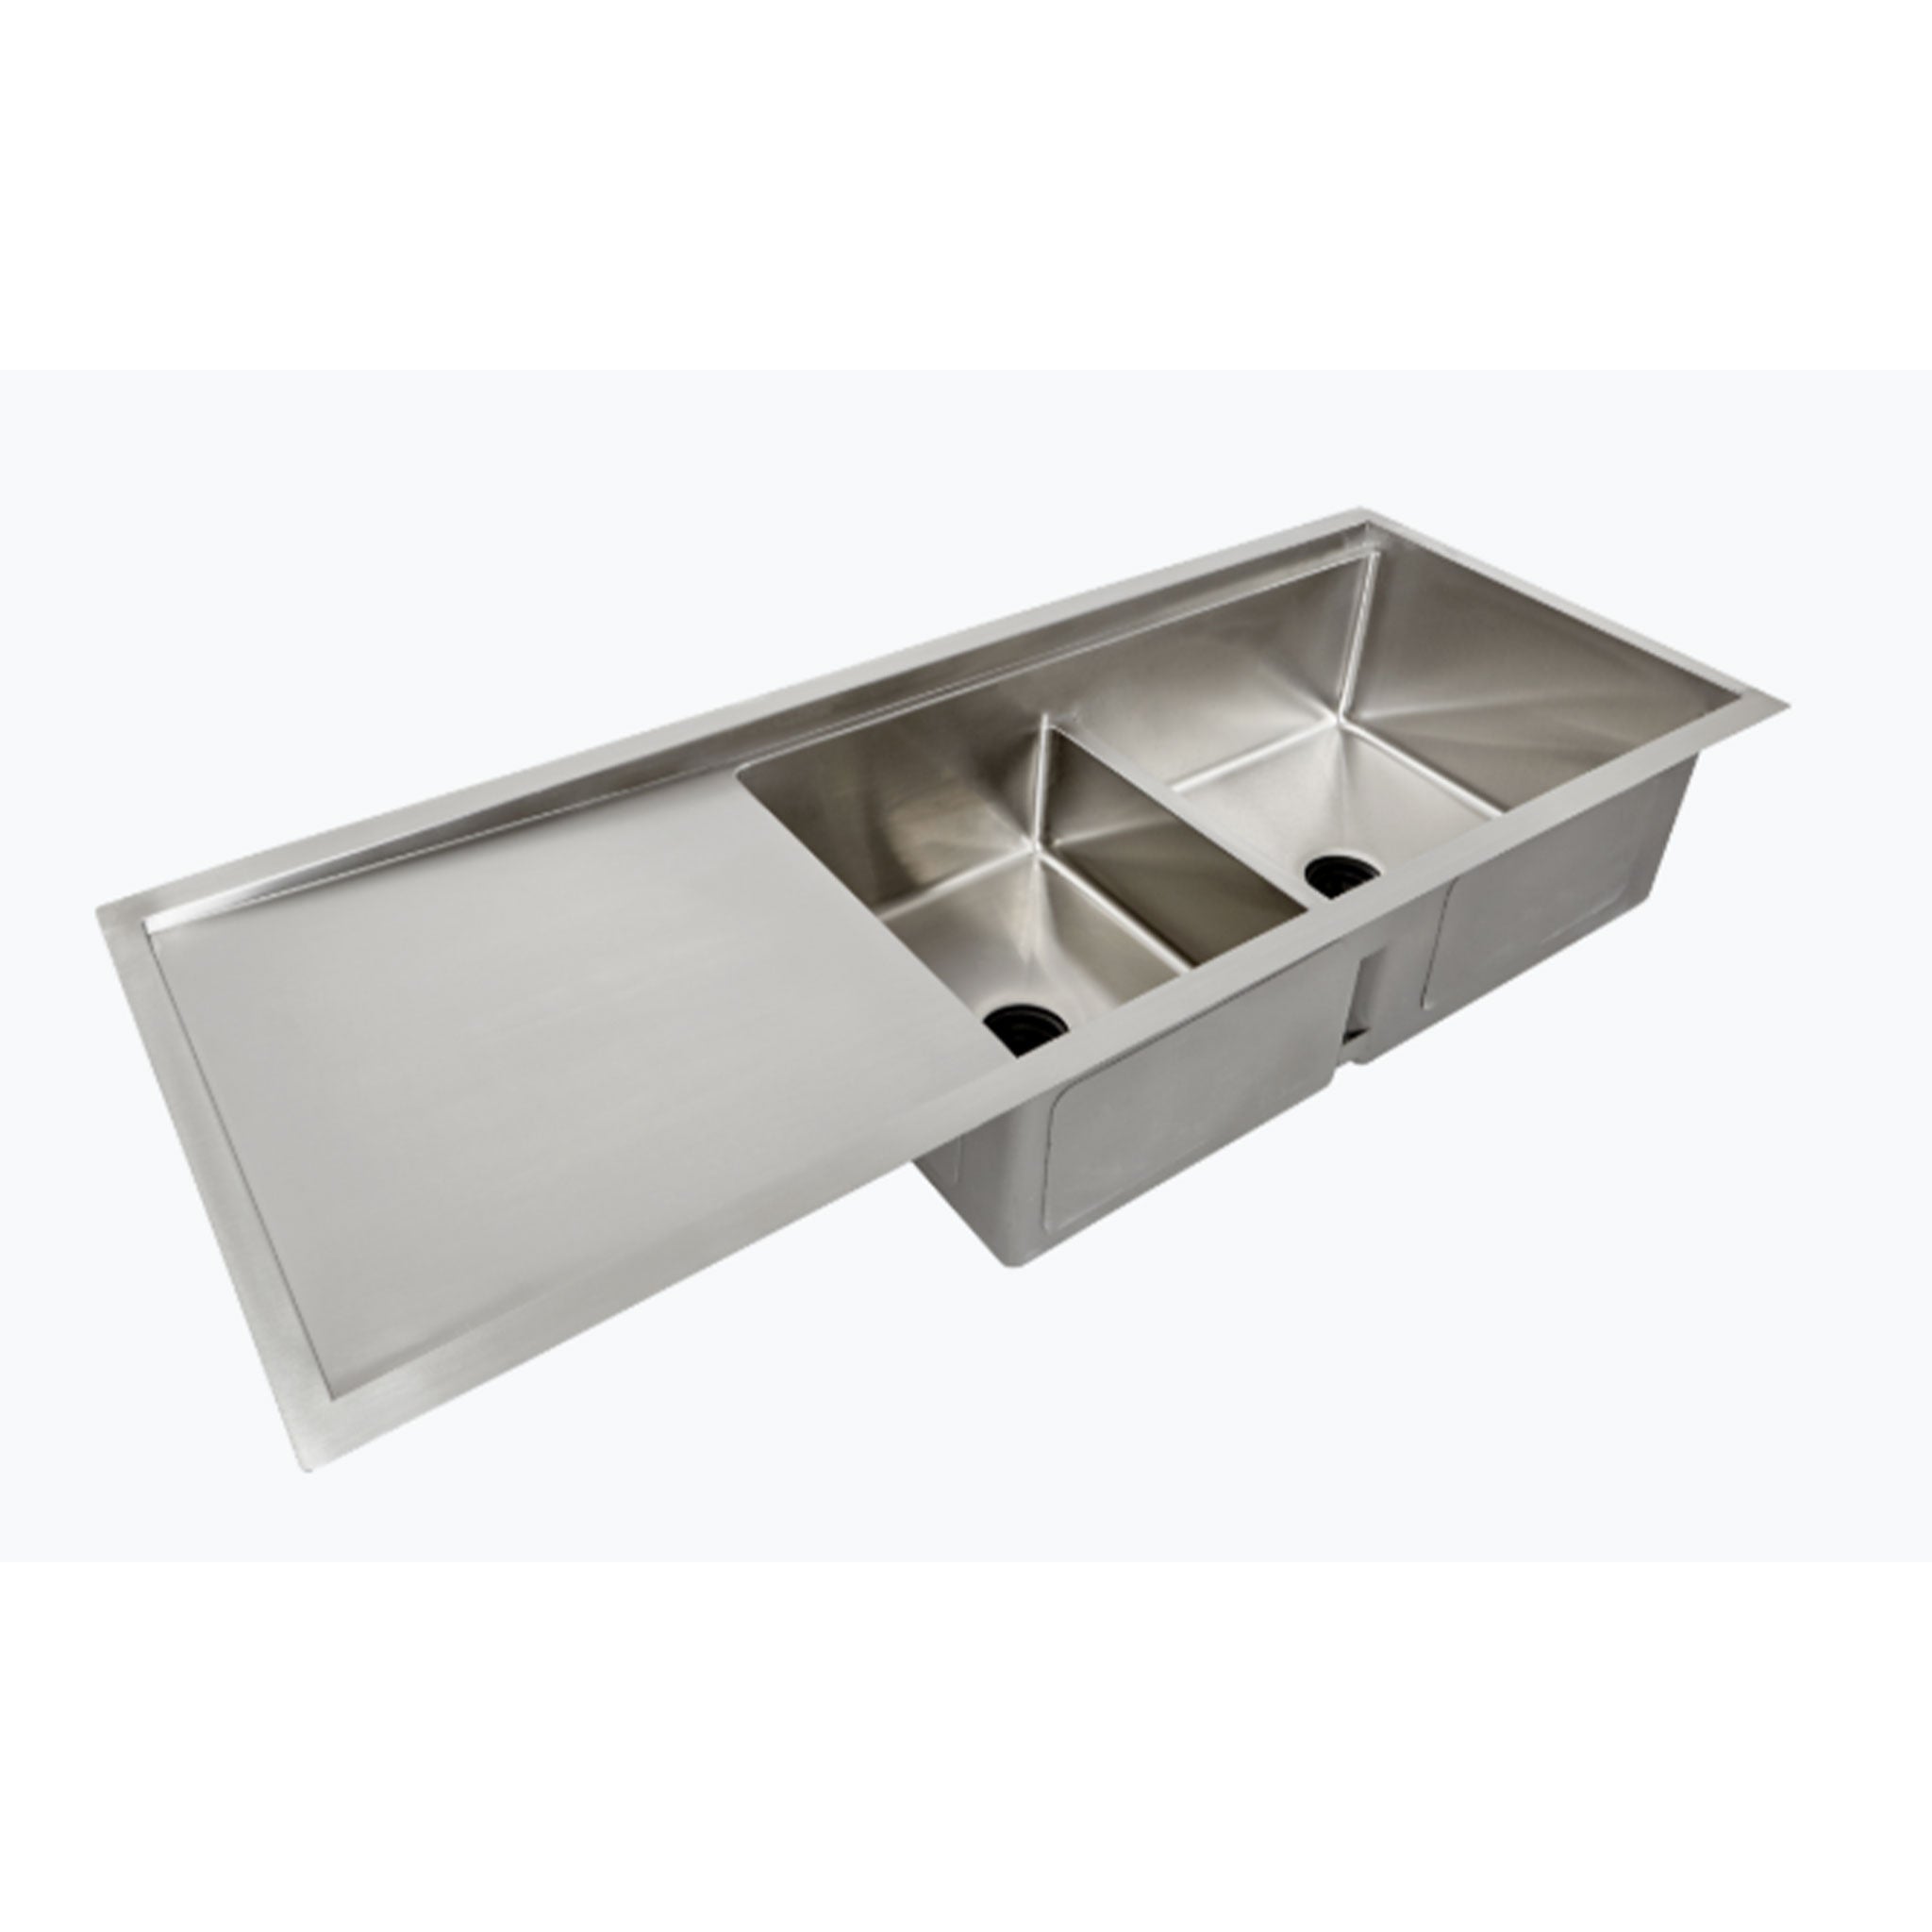 52 inch 16 gauge stainless steel undermount double basin workstation kitchen sink with smart low divide and seamless drain